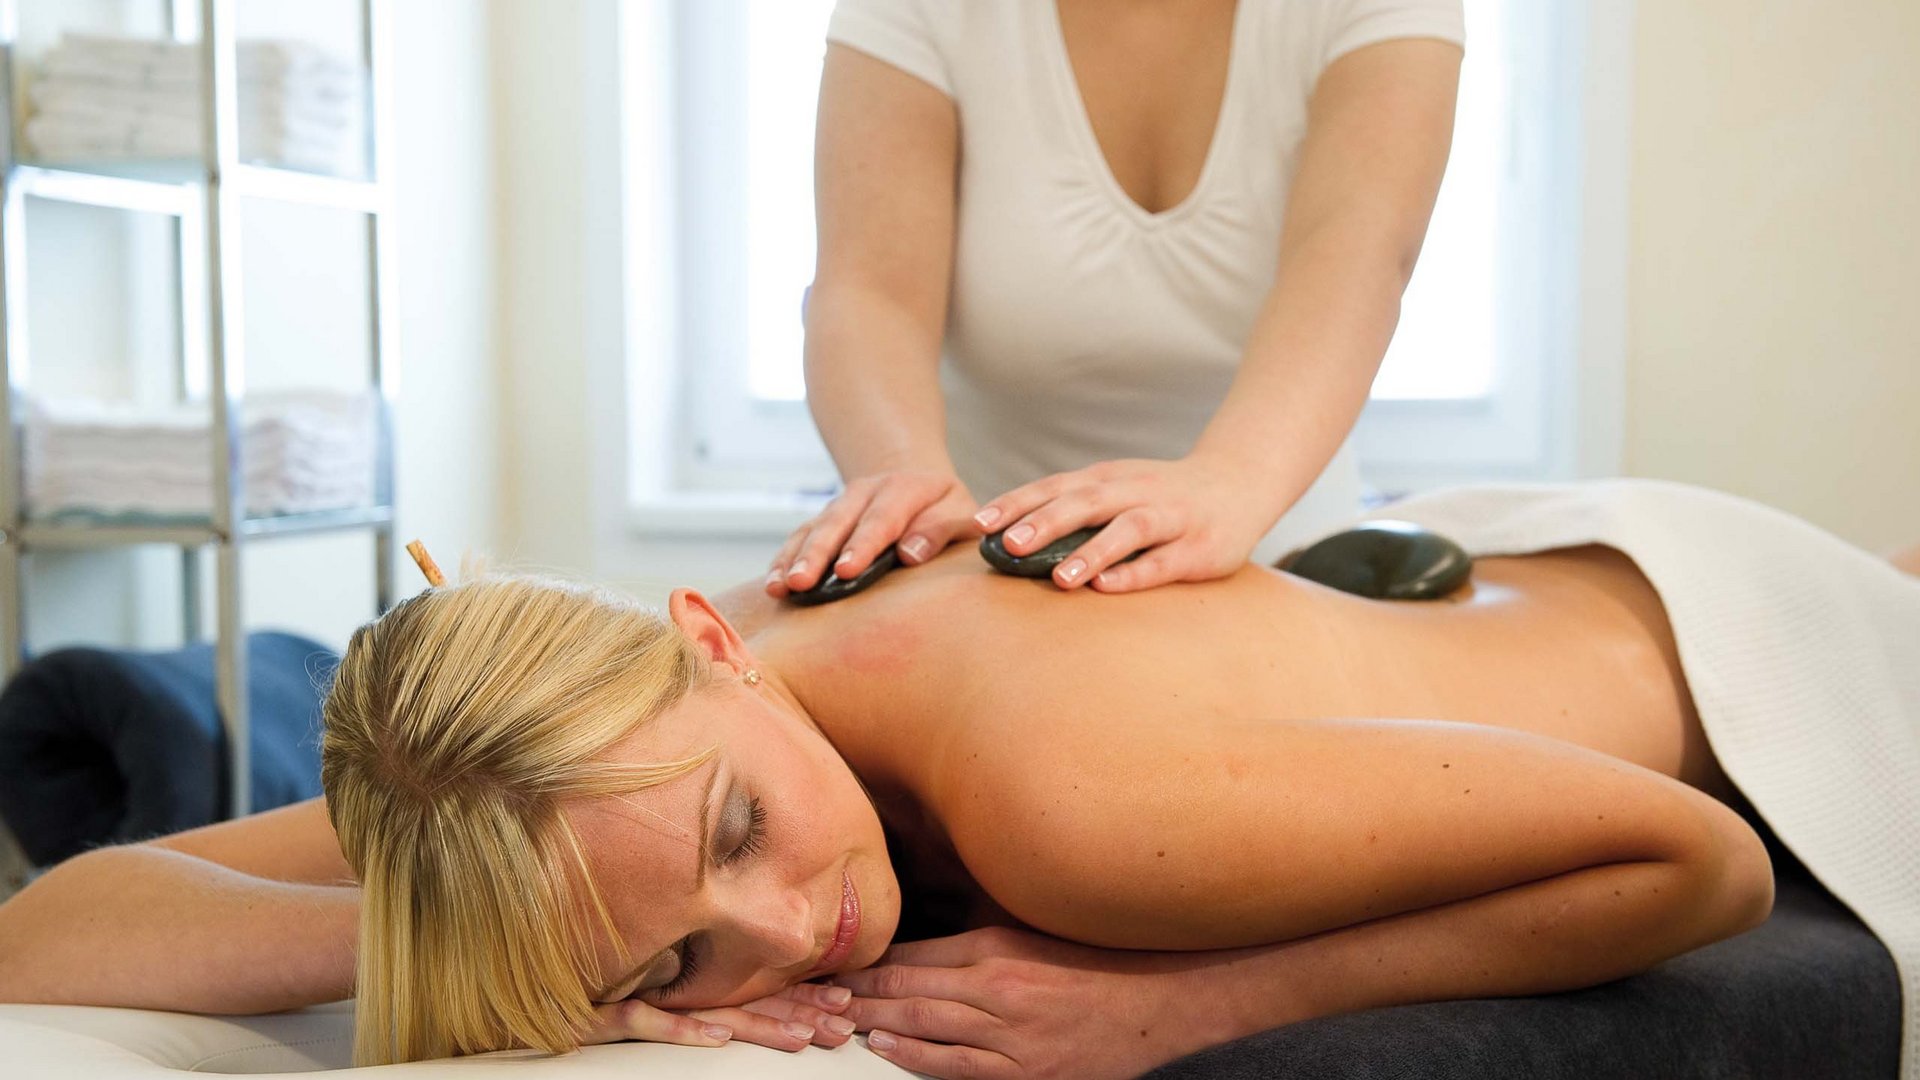 Treatments & massages on your winter vacation in Switzerland